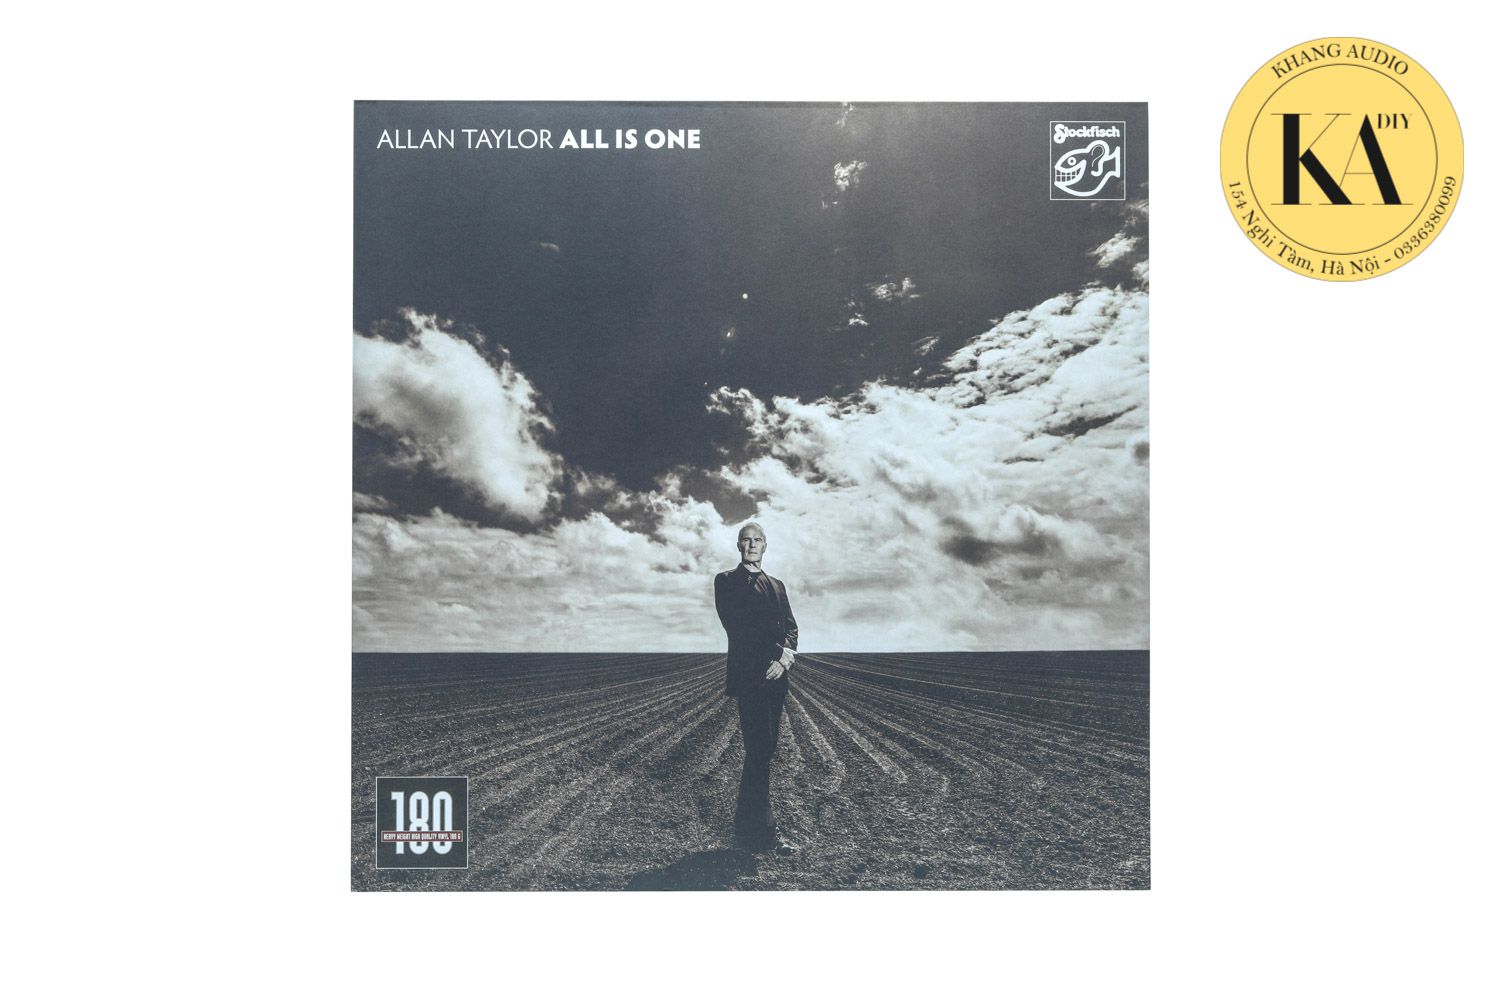 LP All Is One - Allan Taylor; Khang Audio 0336380099